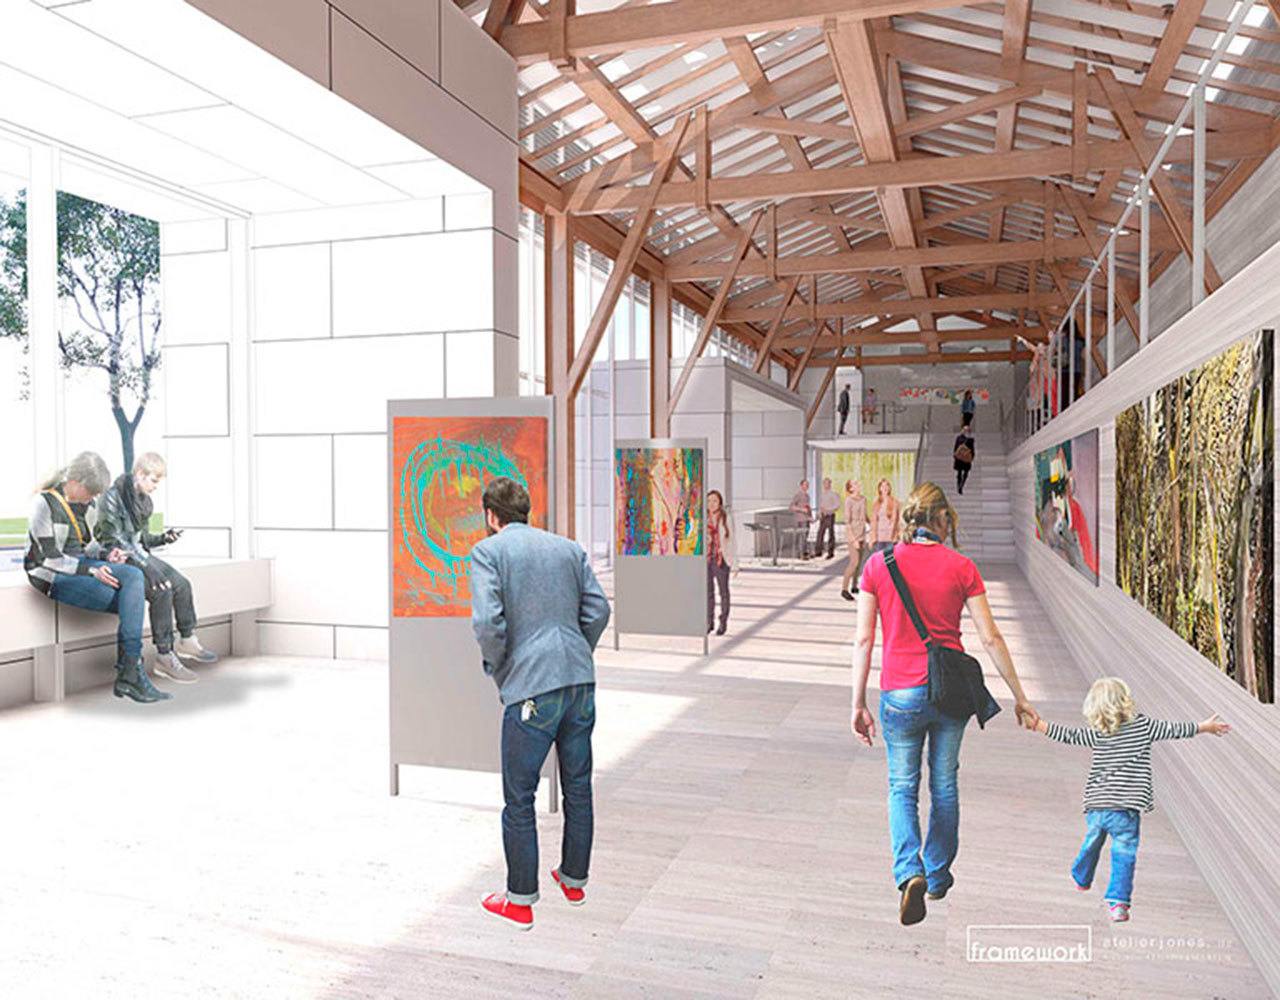 This rendering shows the lobby of the proposed Mercer Island Center for the Arts. Rendering courtesy of the Mercer Island Center for the Arts